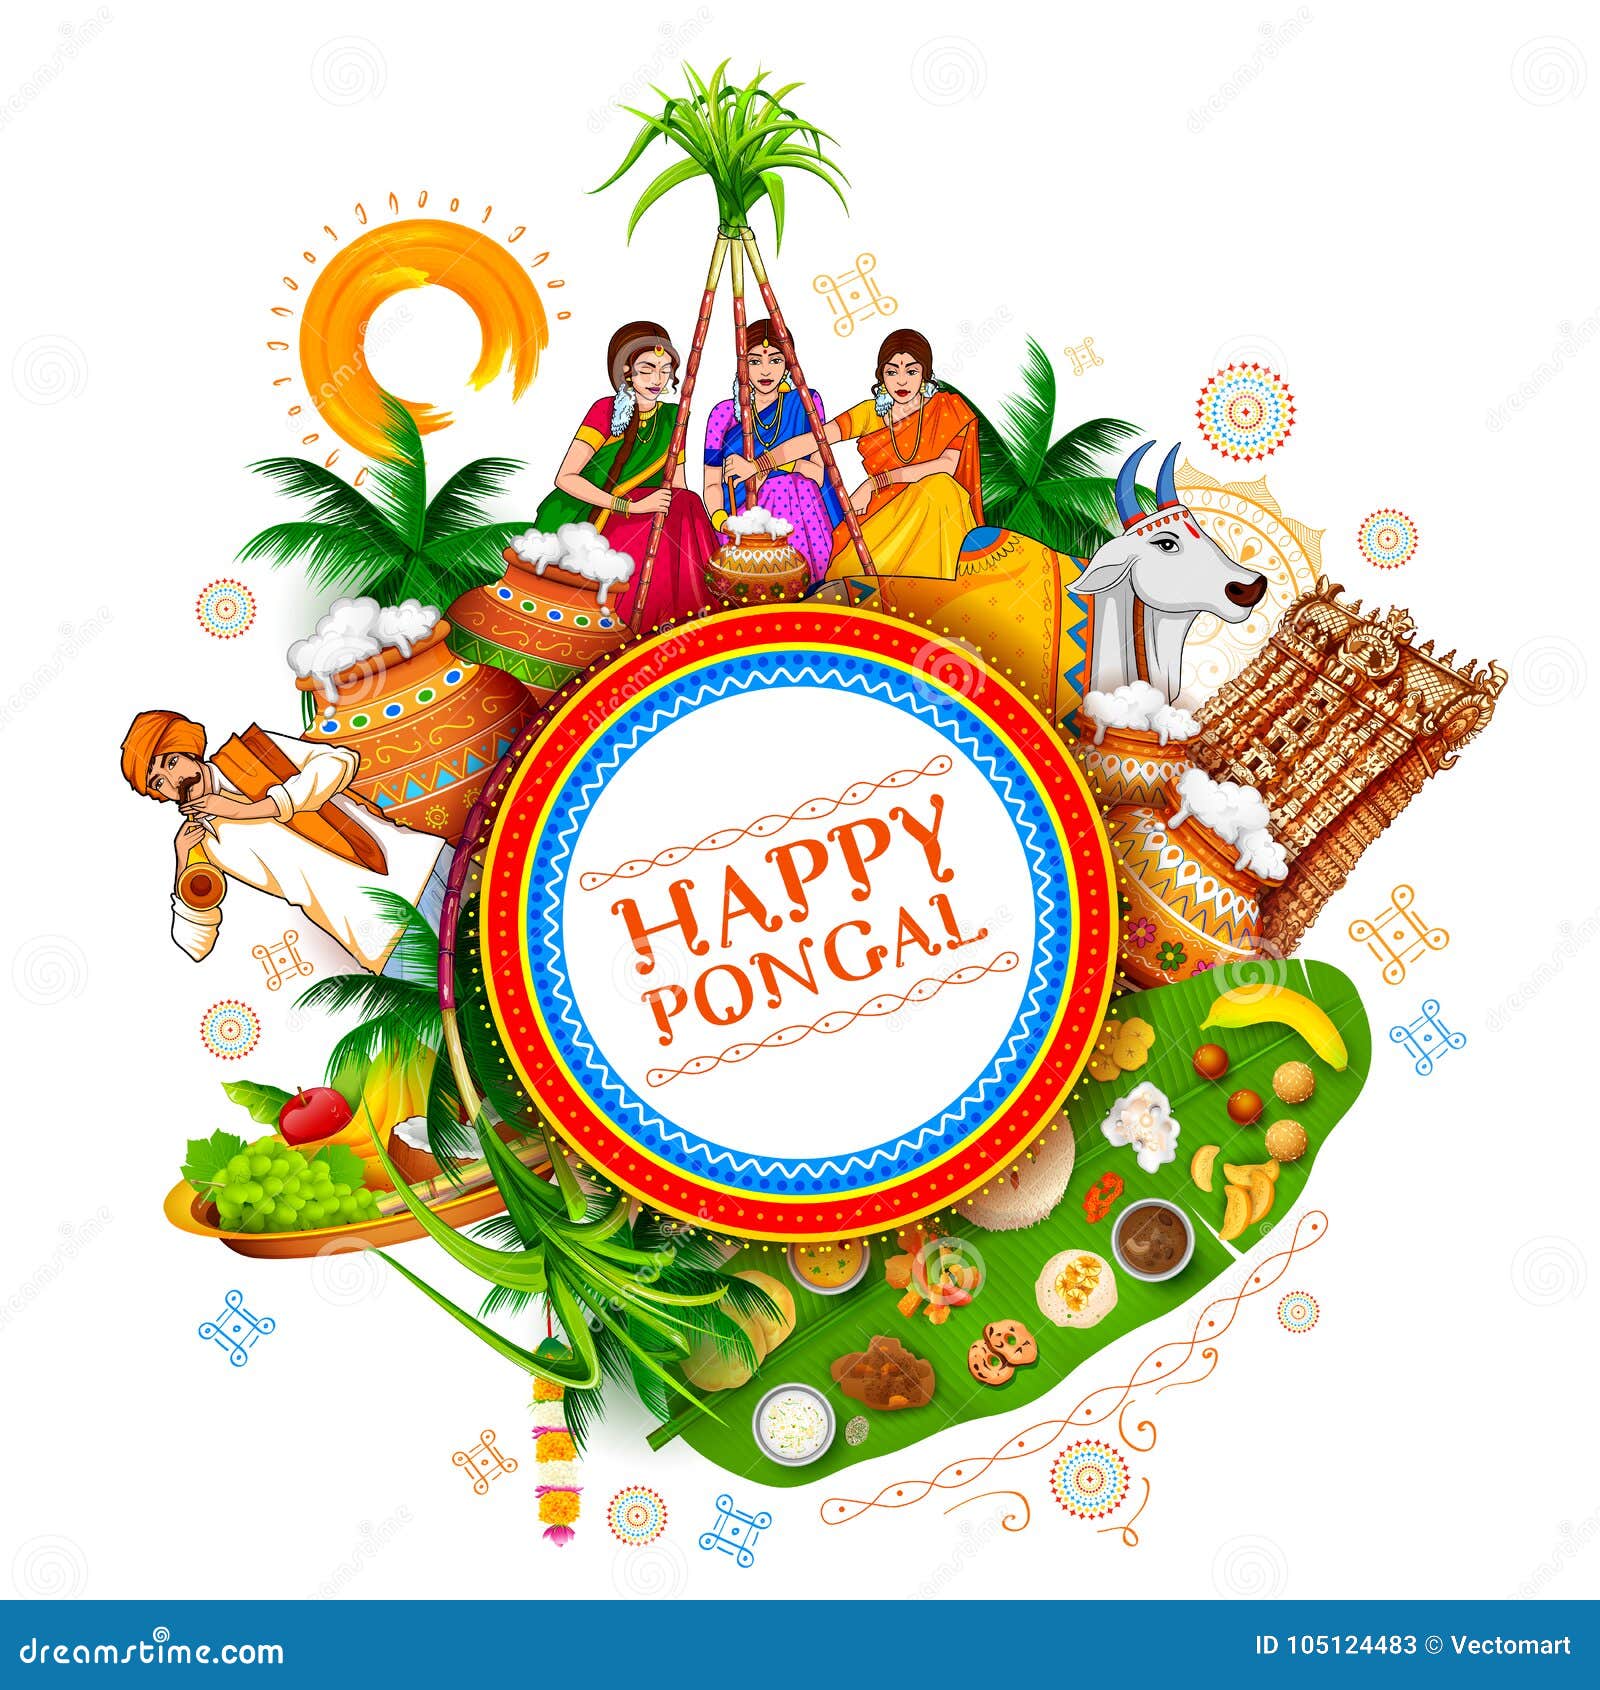 Happy Pongal Holiday Harvest Festival of Tamil Nadu South India ...